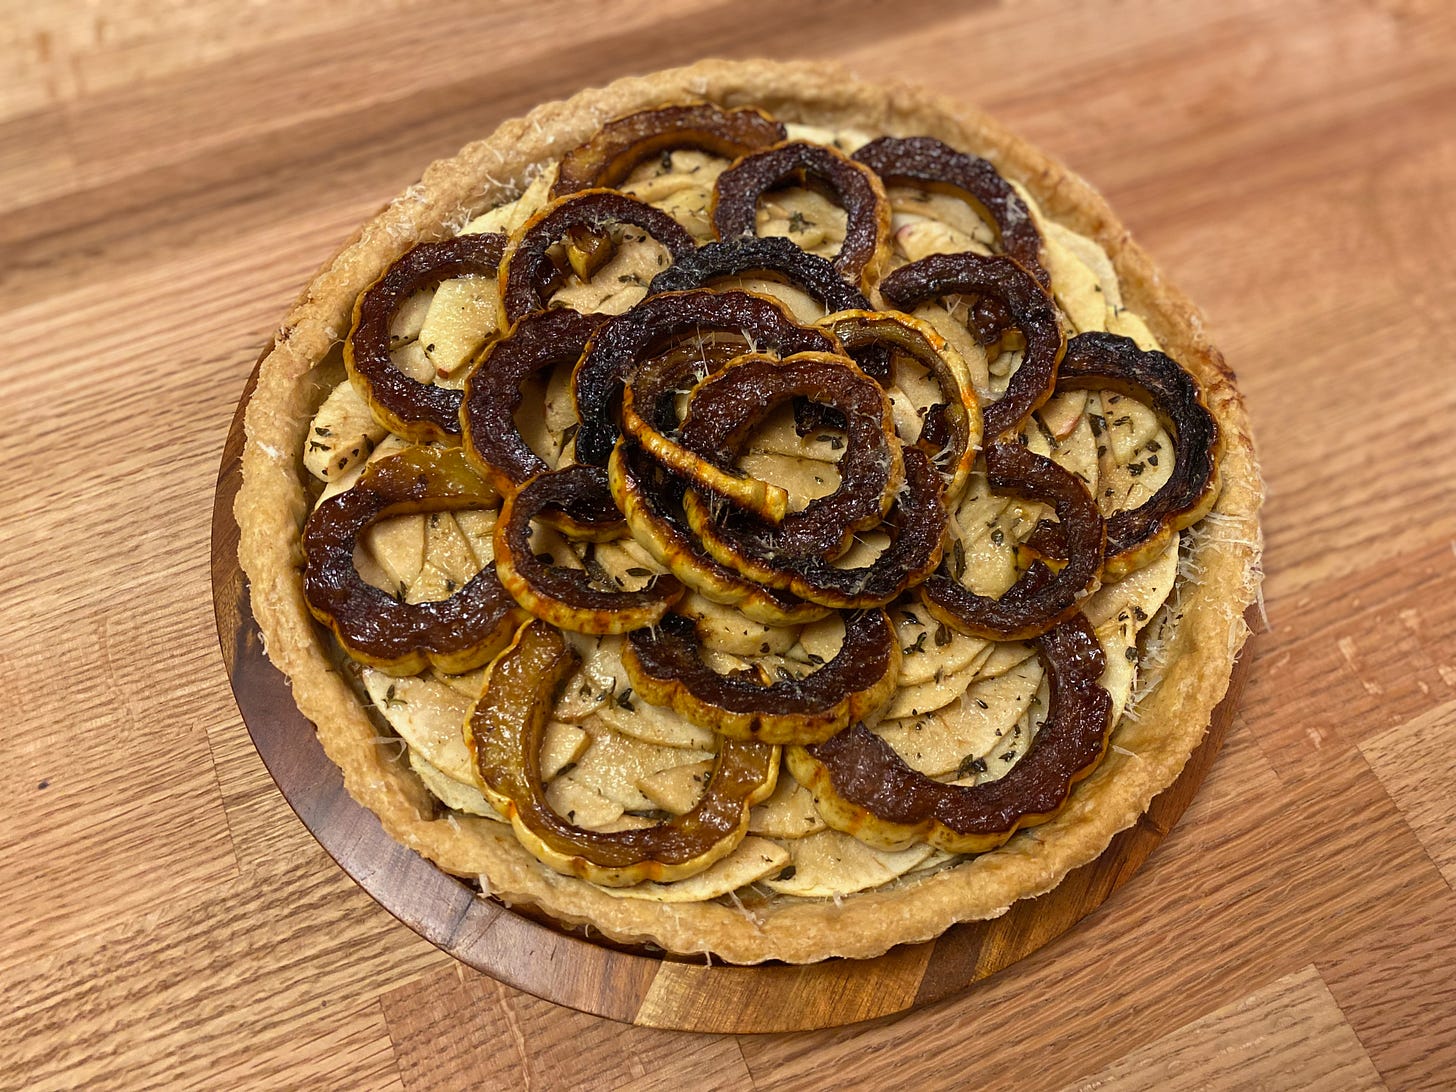 A round tart layered with apple slices and dark, golden brown rings of roasted delicata squash.